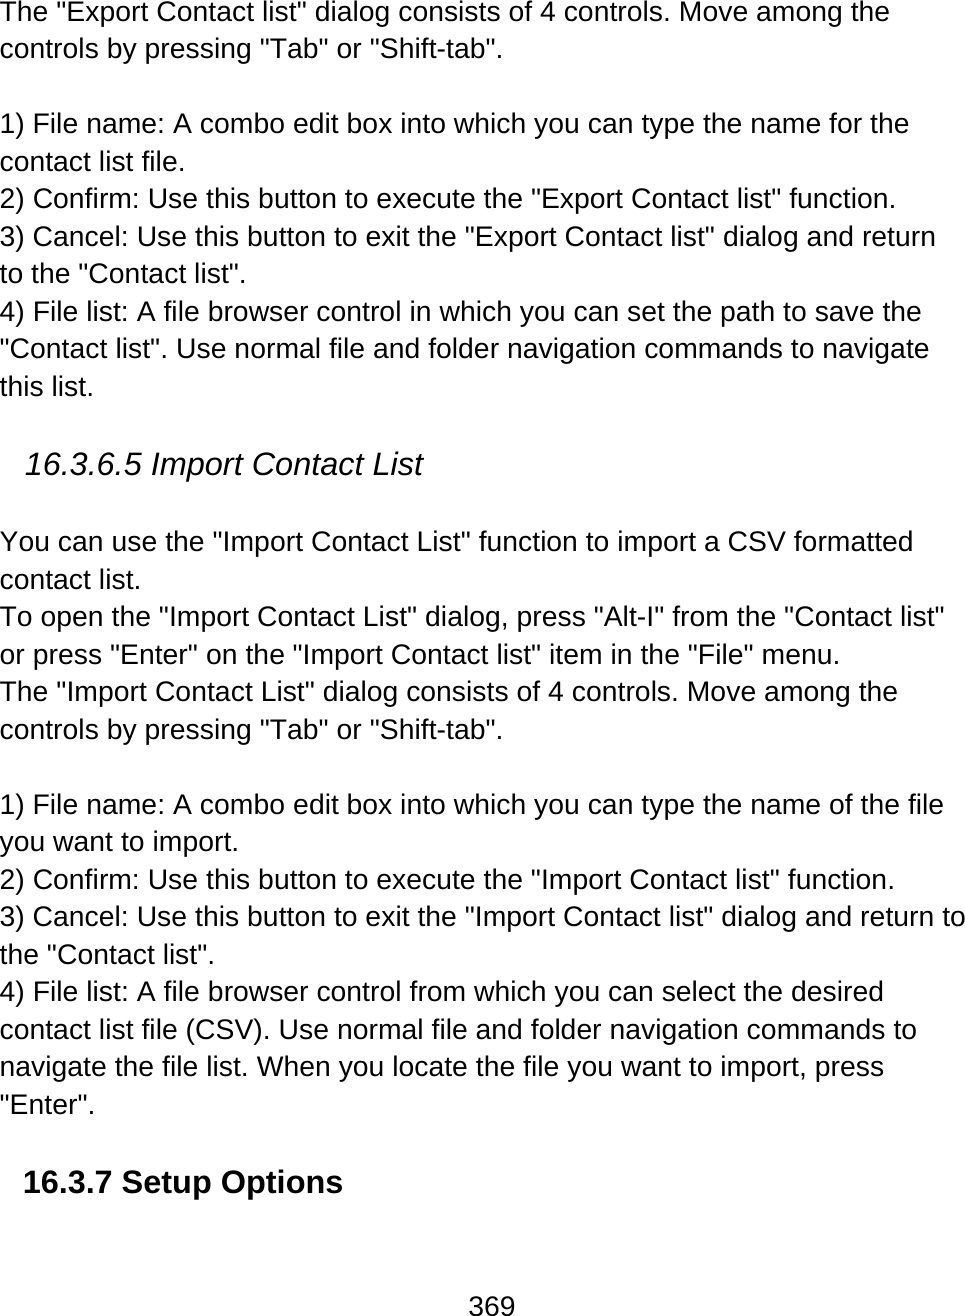 369  The &quot;Export Contact list&quot; dialog consists of 4 controls. Move among the controls by pressing &quot;Tab&quot; or &quot;Shift-tab&quot;.  1) File name: A combo edit box into which you can type the name for the contact list file.  2) Confirm: Use this button to execute the &quot;Export Contact list&quot; function. 3) Cancel: Use this button to exit the &quot;Export Contact list&quot; dialog and return to the &quot;Contact list&quot;.  4) File list: A file browser control in which you can set the path to save the &quot;Contact list&quot;. Use normal file and folder navigation commands to navigate this list.    16.3.6.5 Import Contact List   You can use the &quot;Import Contact List&quot; function to import a CSV formatted contact list.  To open the &quot;Import Contact List&quot; dialog, press &quot;Alt-I&quot; from the &quot;Contact list&quot; or press &quot;Enter&quot; on the &quot;Import Contact list&quot; item in the &quot;File&quot; menu.  The &quot;Import Contact List&quot; dialog consists of 4 controls. Move among the controls by pressing &quot;Tab&quot; or &quot;Shift-tab&quot;.  1) File name: A combo edit box into which you can type the name of the file you want to import.  2) Confirm: Use this button to execute the &quot;Import Contact list&quot; function. 3) Cancel: Use this button to exit the &quot;Import Contact list&quot; dialog and return to the &quot;Contact list&quot;.  4) File list: A file browser control from which you can select the desired contact list file (CSV). Use normal file and folder navigation commands to navigate the file list. When you locate the file you want to import, press &quot;Enter&quot;.  16.3.7 Setup Options  